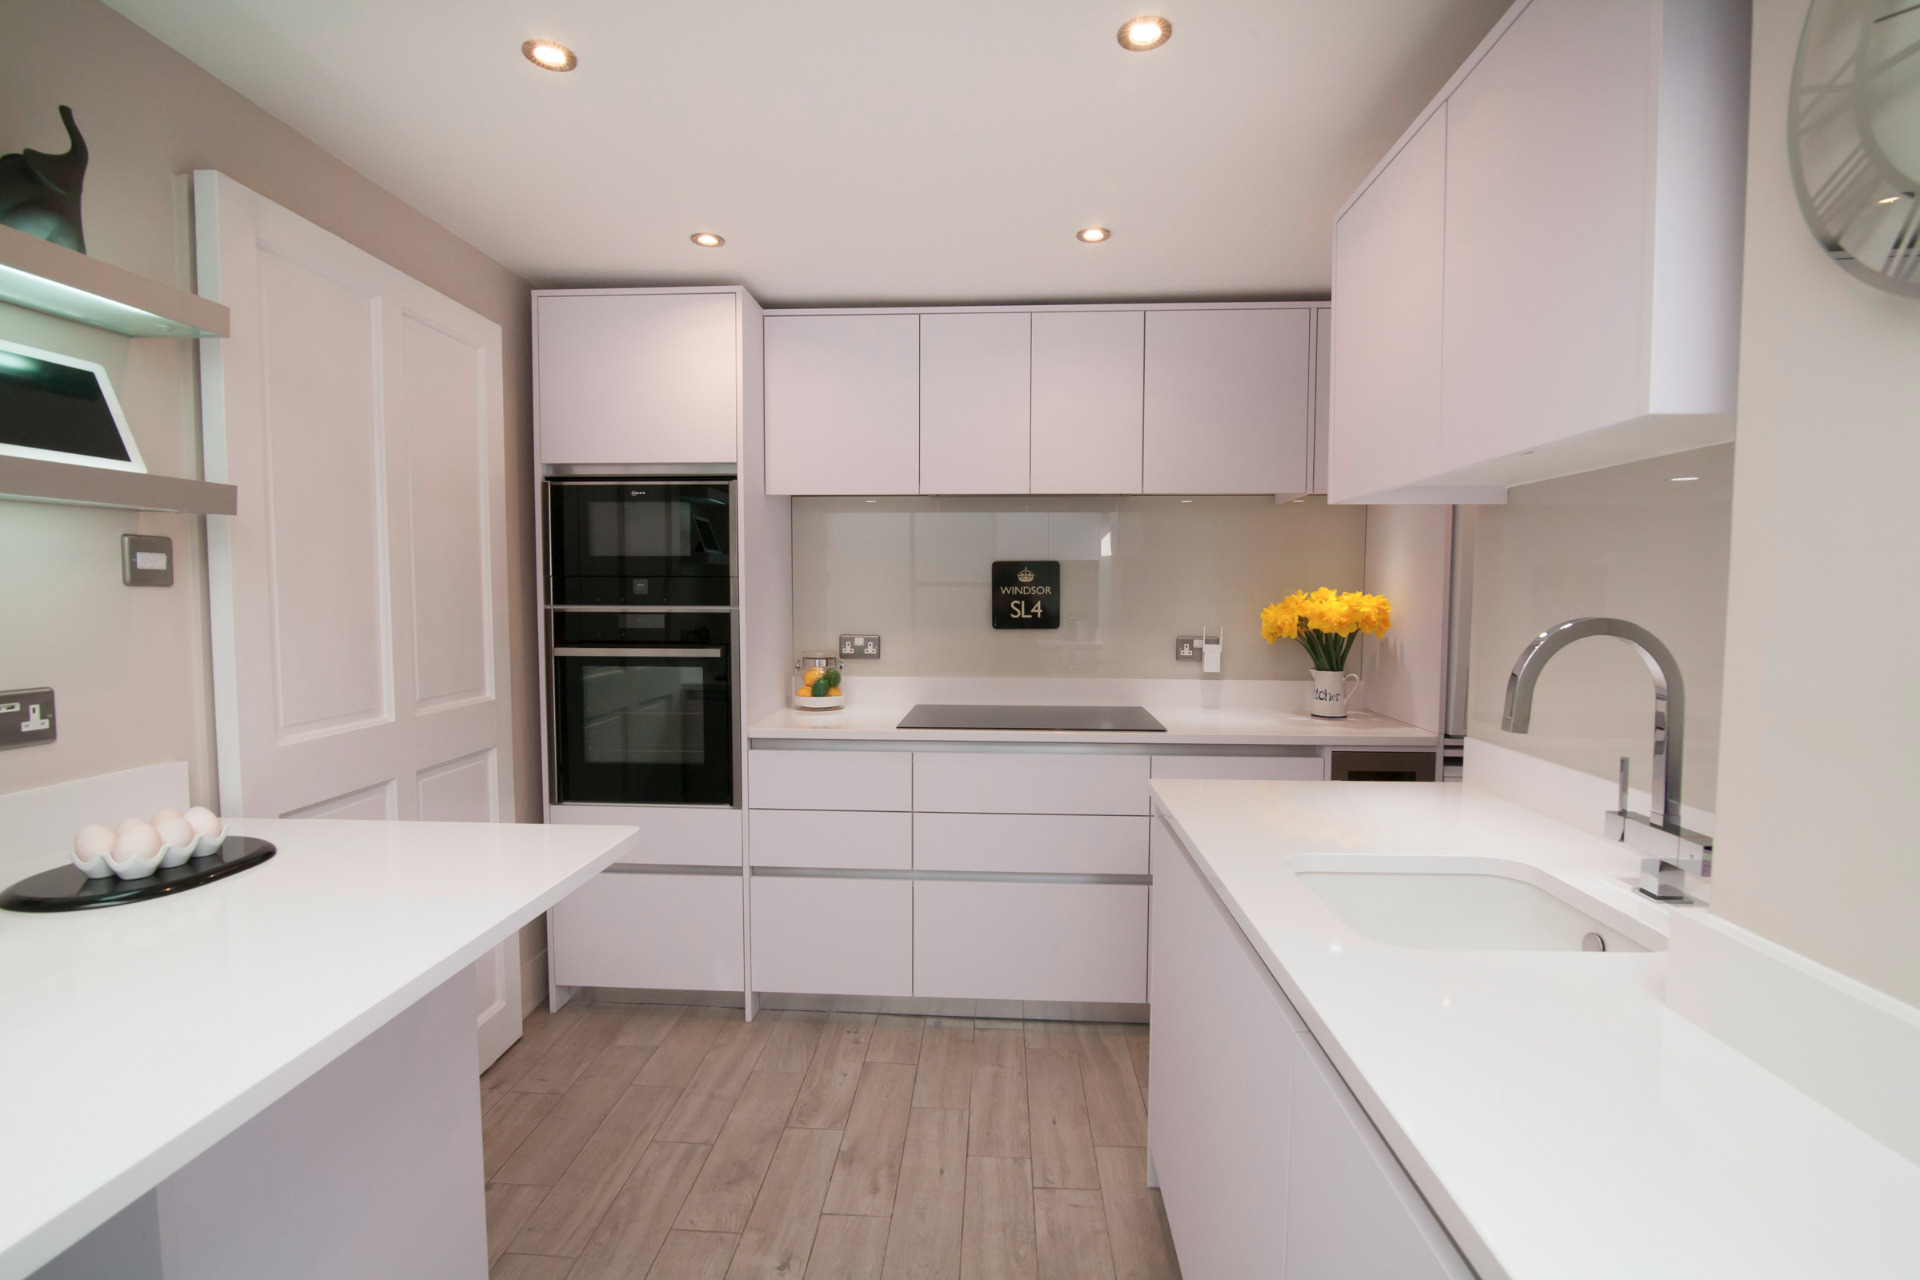 Contemporary white handless lacquered kitchen design